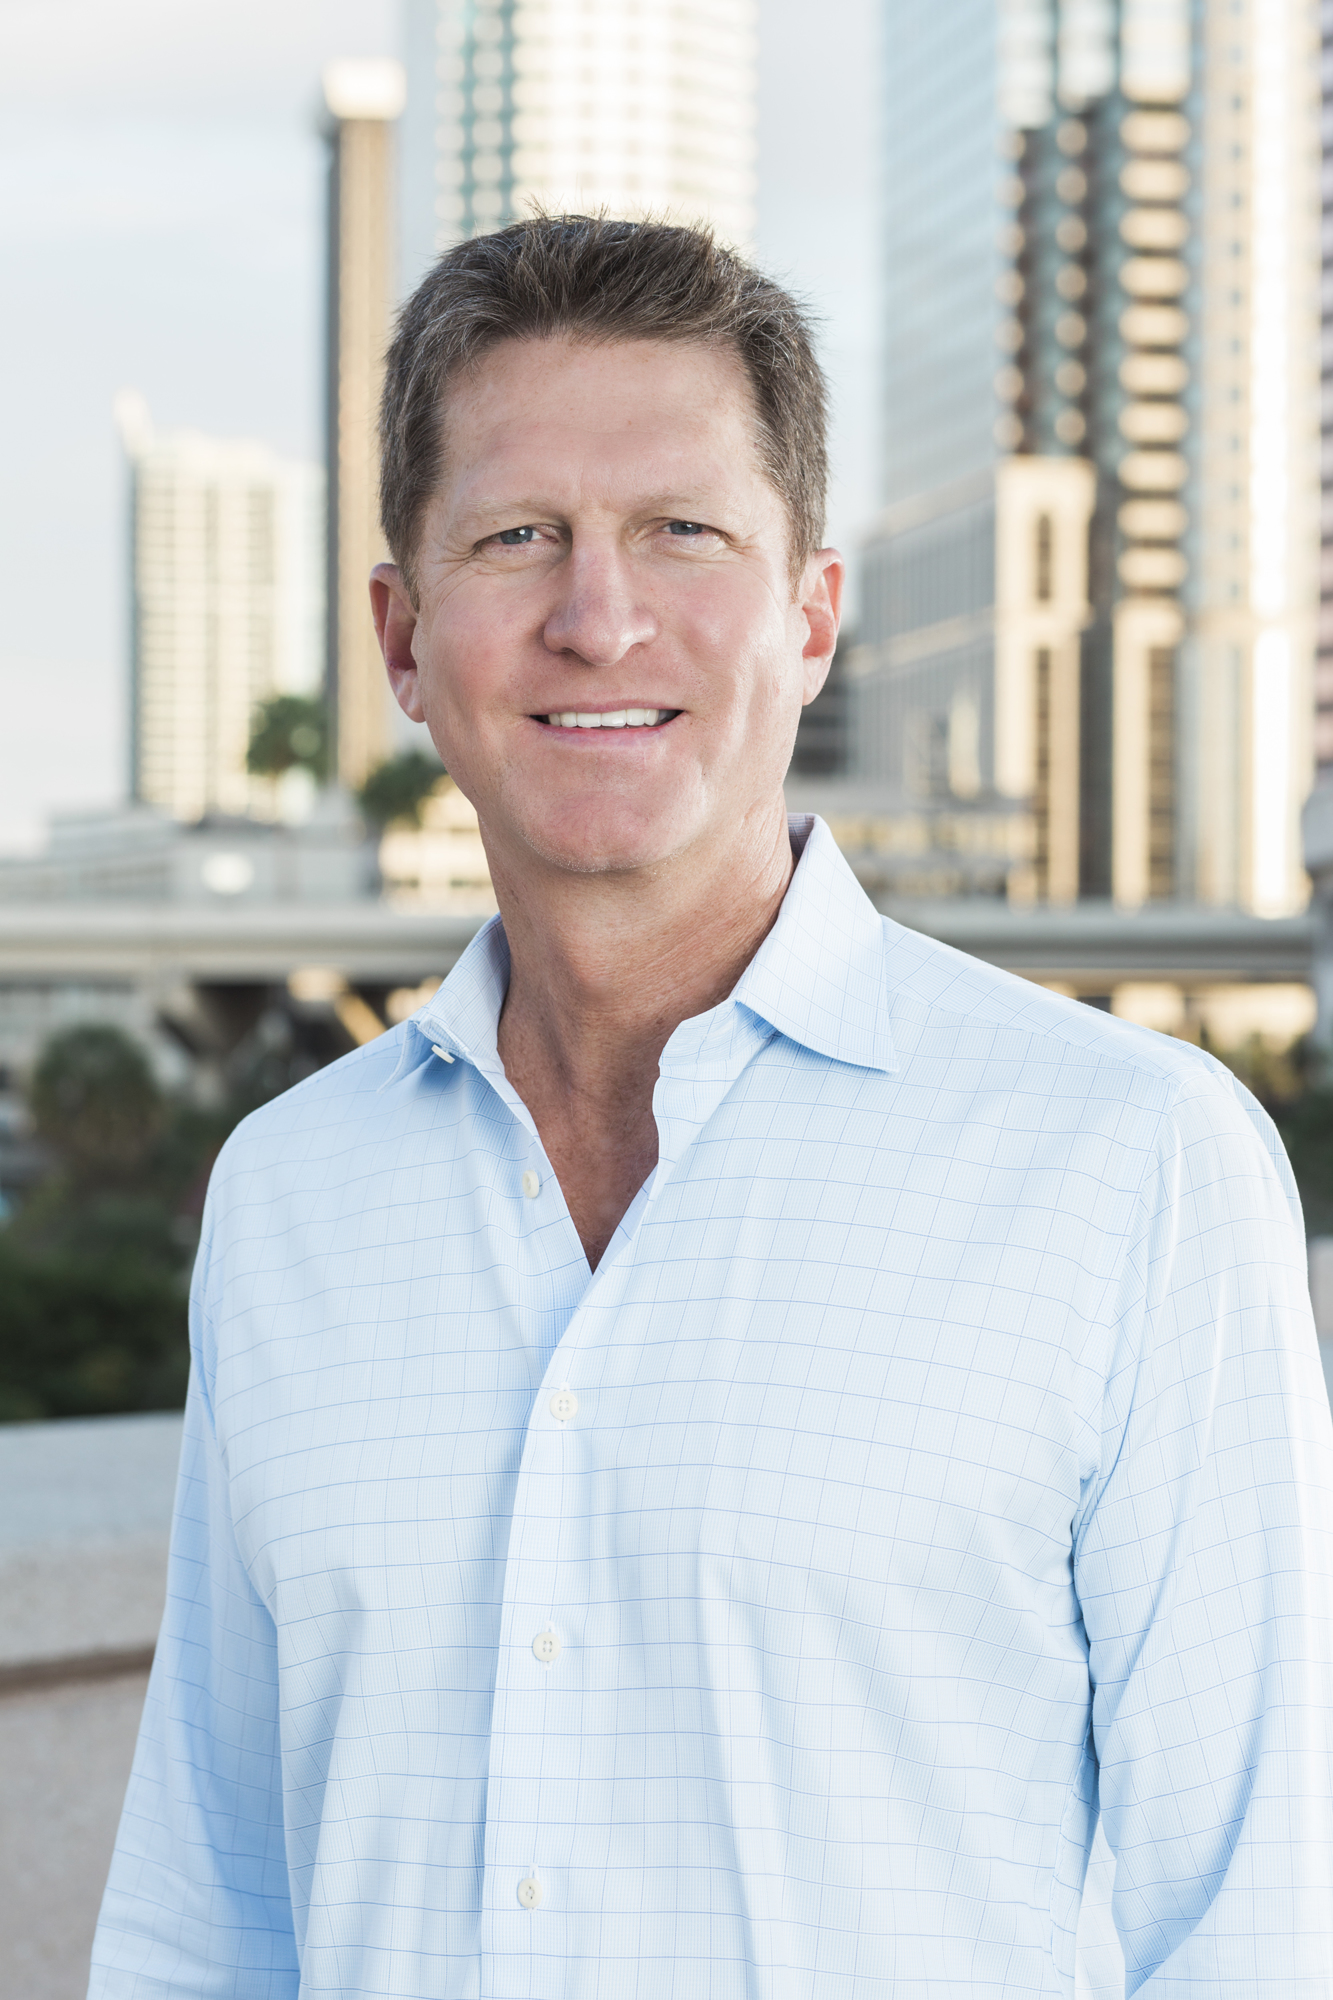 COURTESY PHOTO — Joe Collier is president of Mainsail Lodging and Development